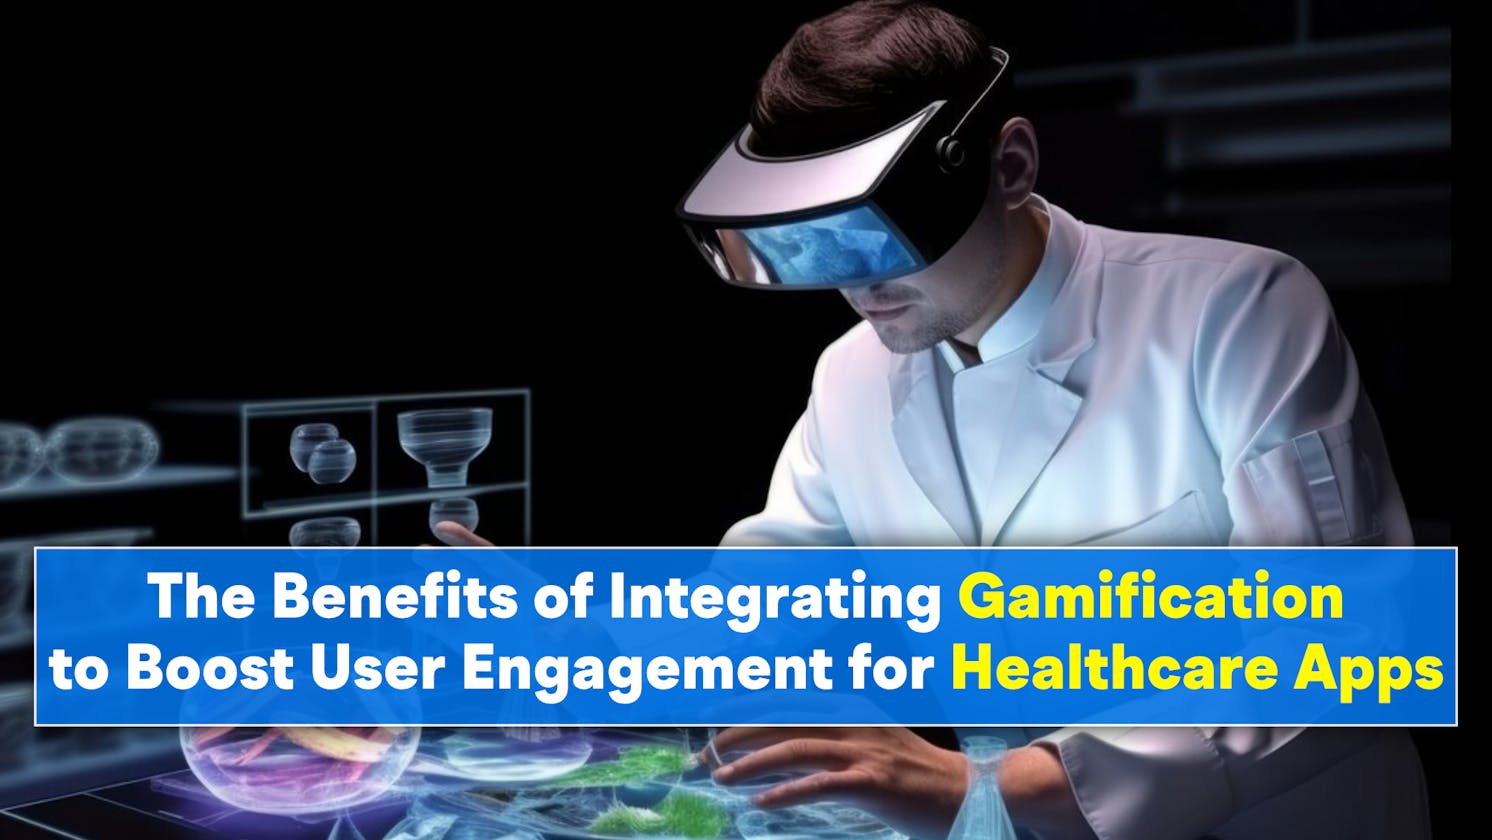 The Benefits of Integrating Gamification to Boost User Engagement for Healthcare Apps